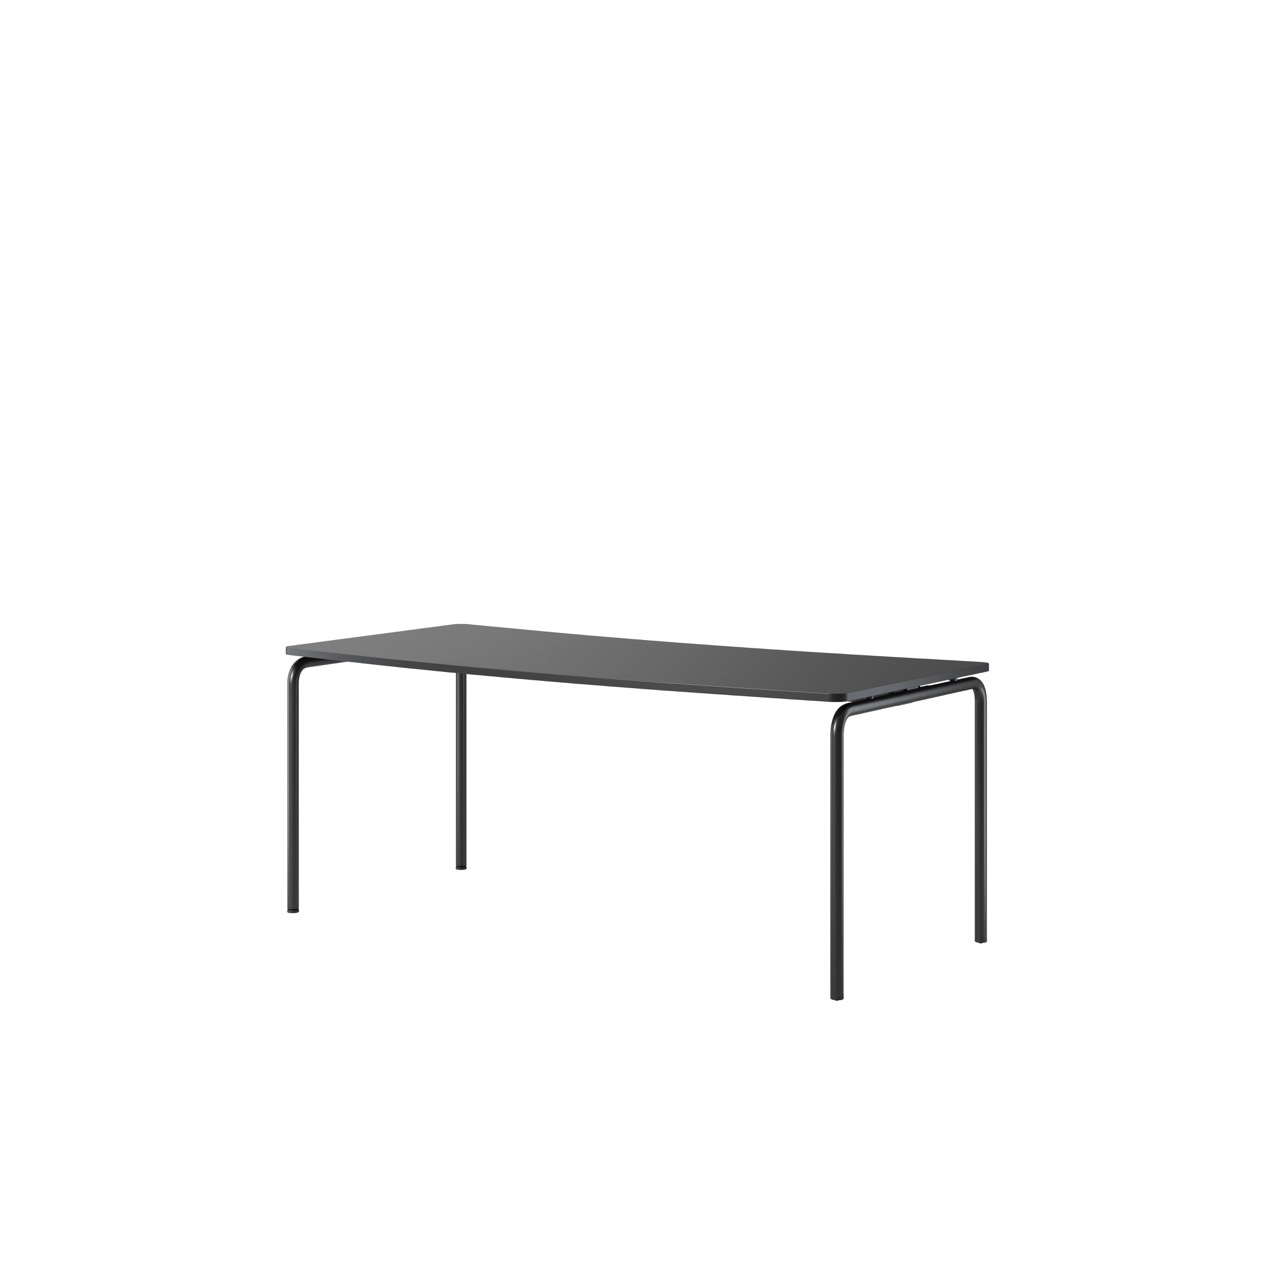 OCEE&FOUR - Tables - FourReal 74 - 180 x 80 - straight - Packshot Image 3 Large